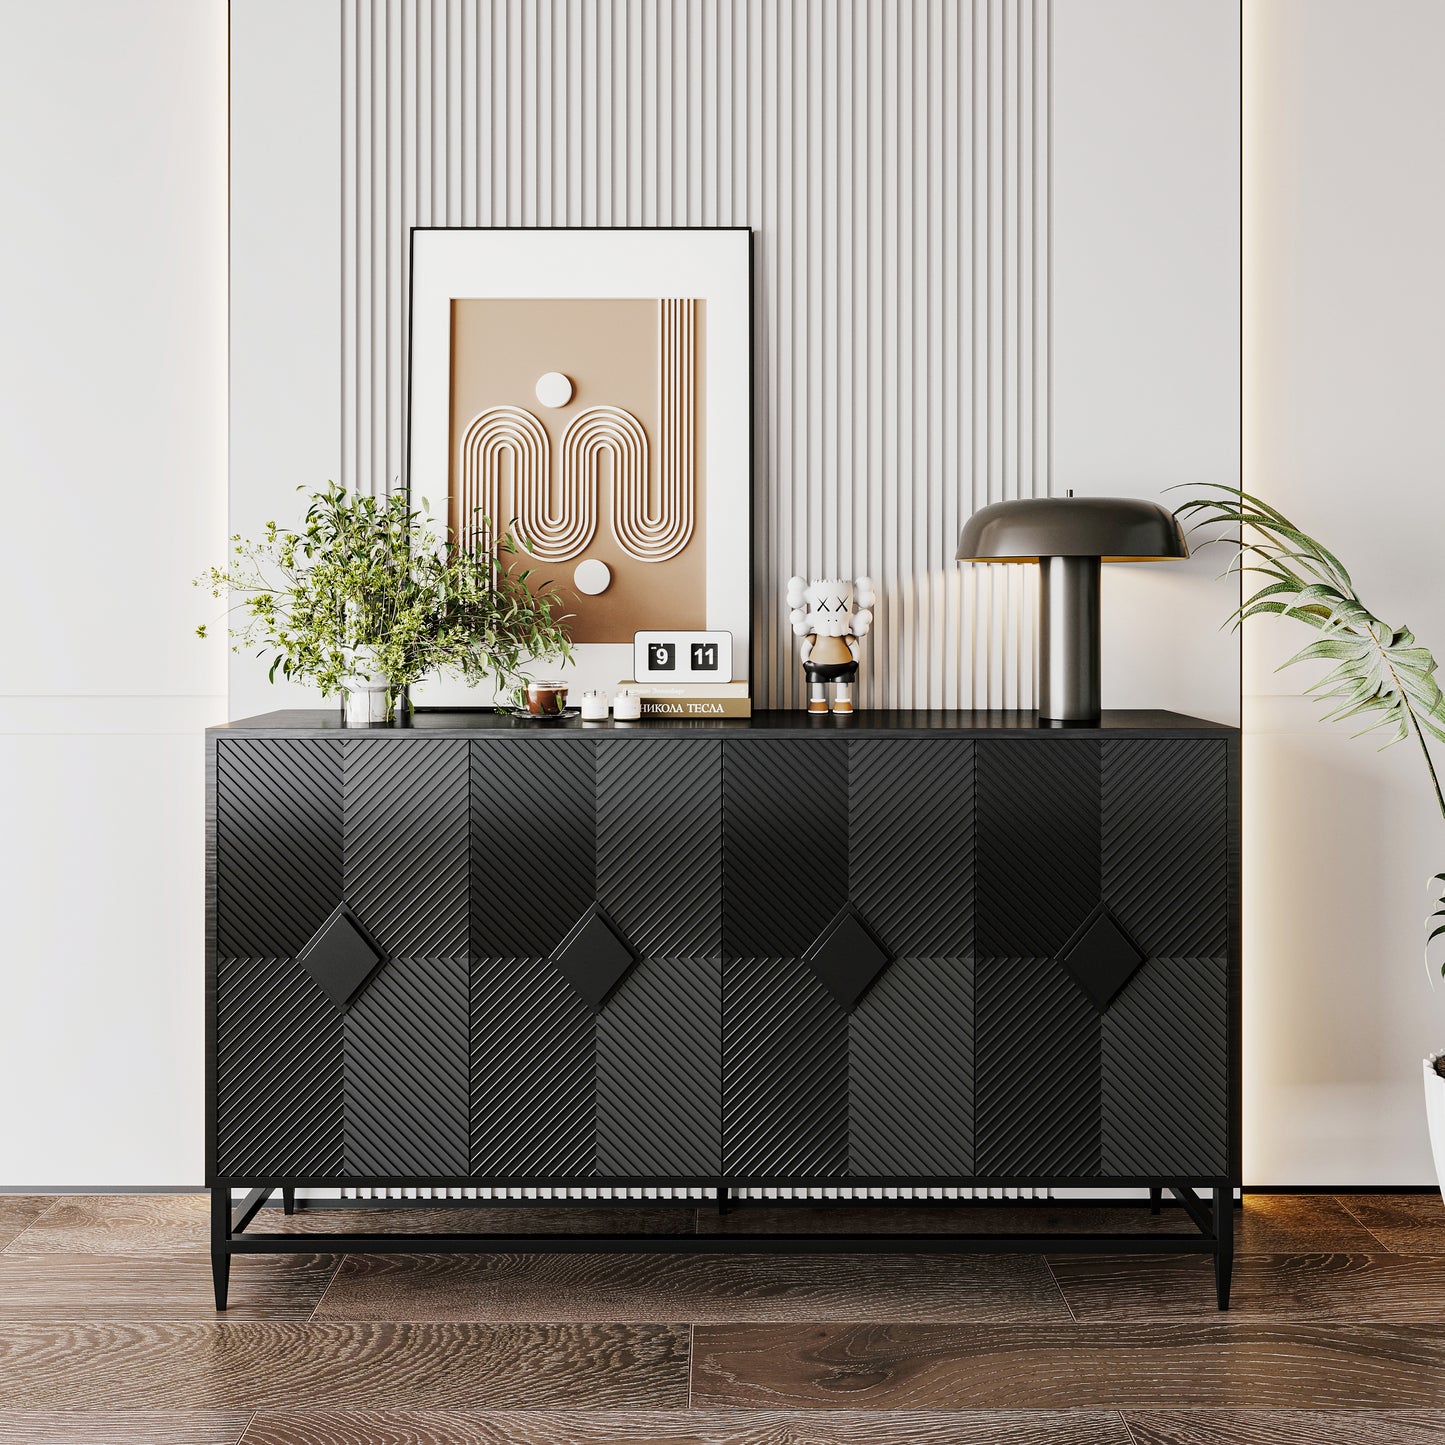 Elegant Versatility: Matte Black Lacquered Accent Cabinet with Four Doors, Spacious Sideboard and Buffet Server for Stylish Storage in Living Rooms, Entryways, Offices, and Dining Spaces.